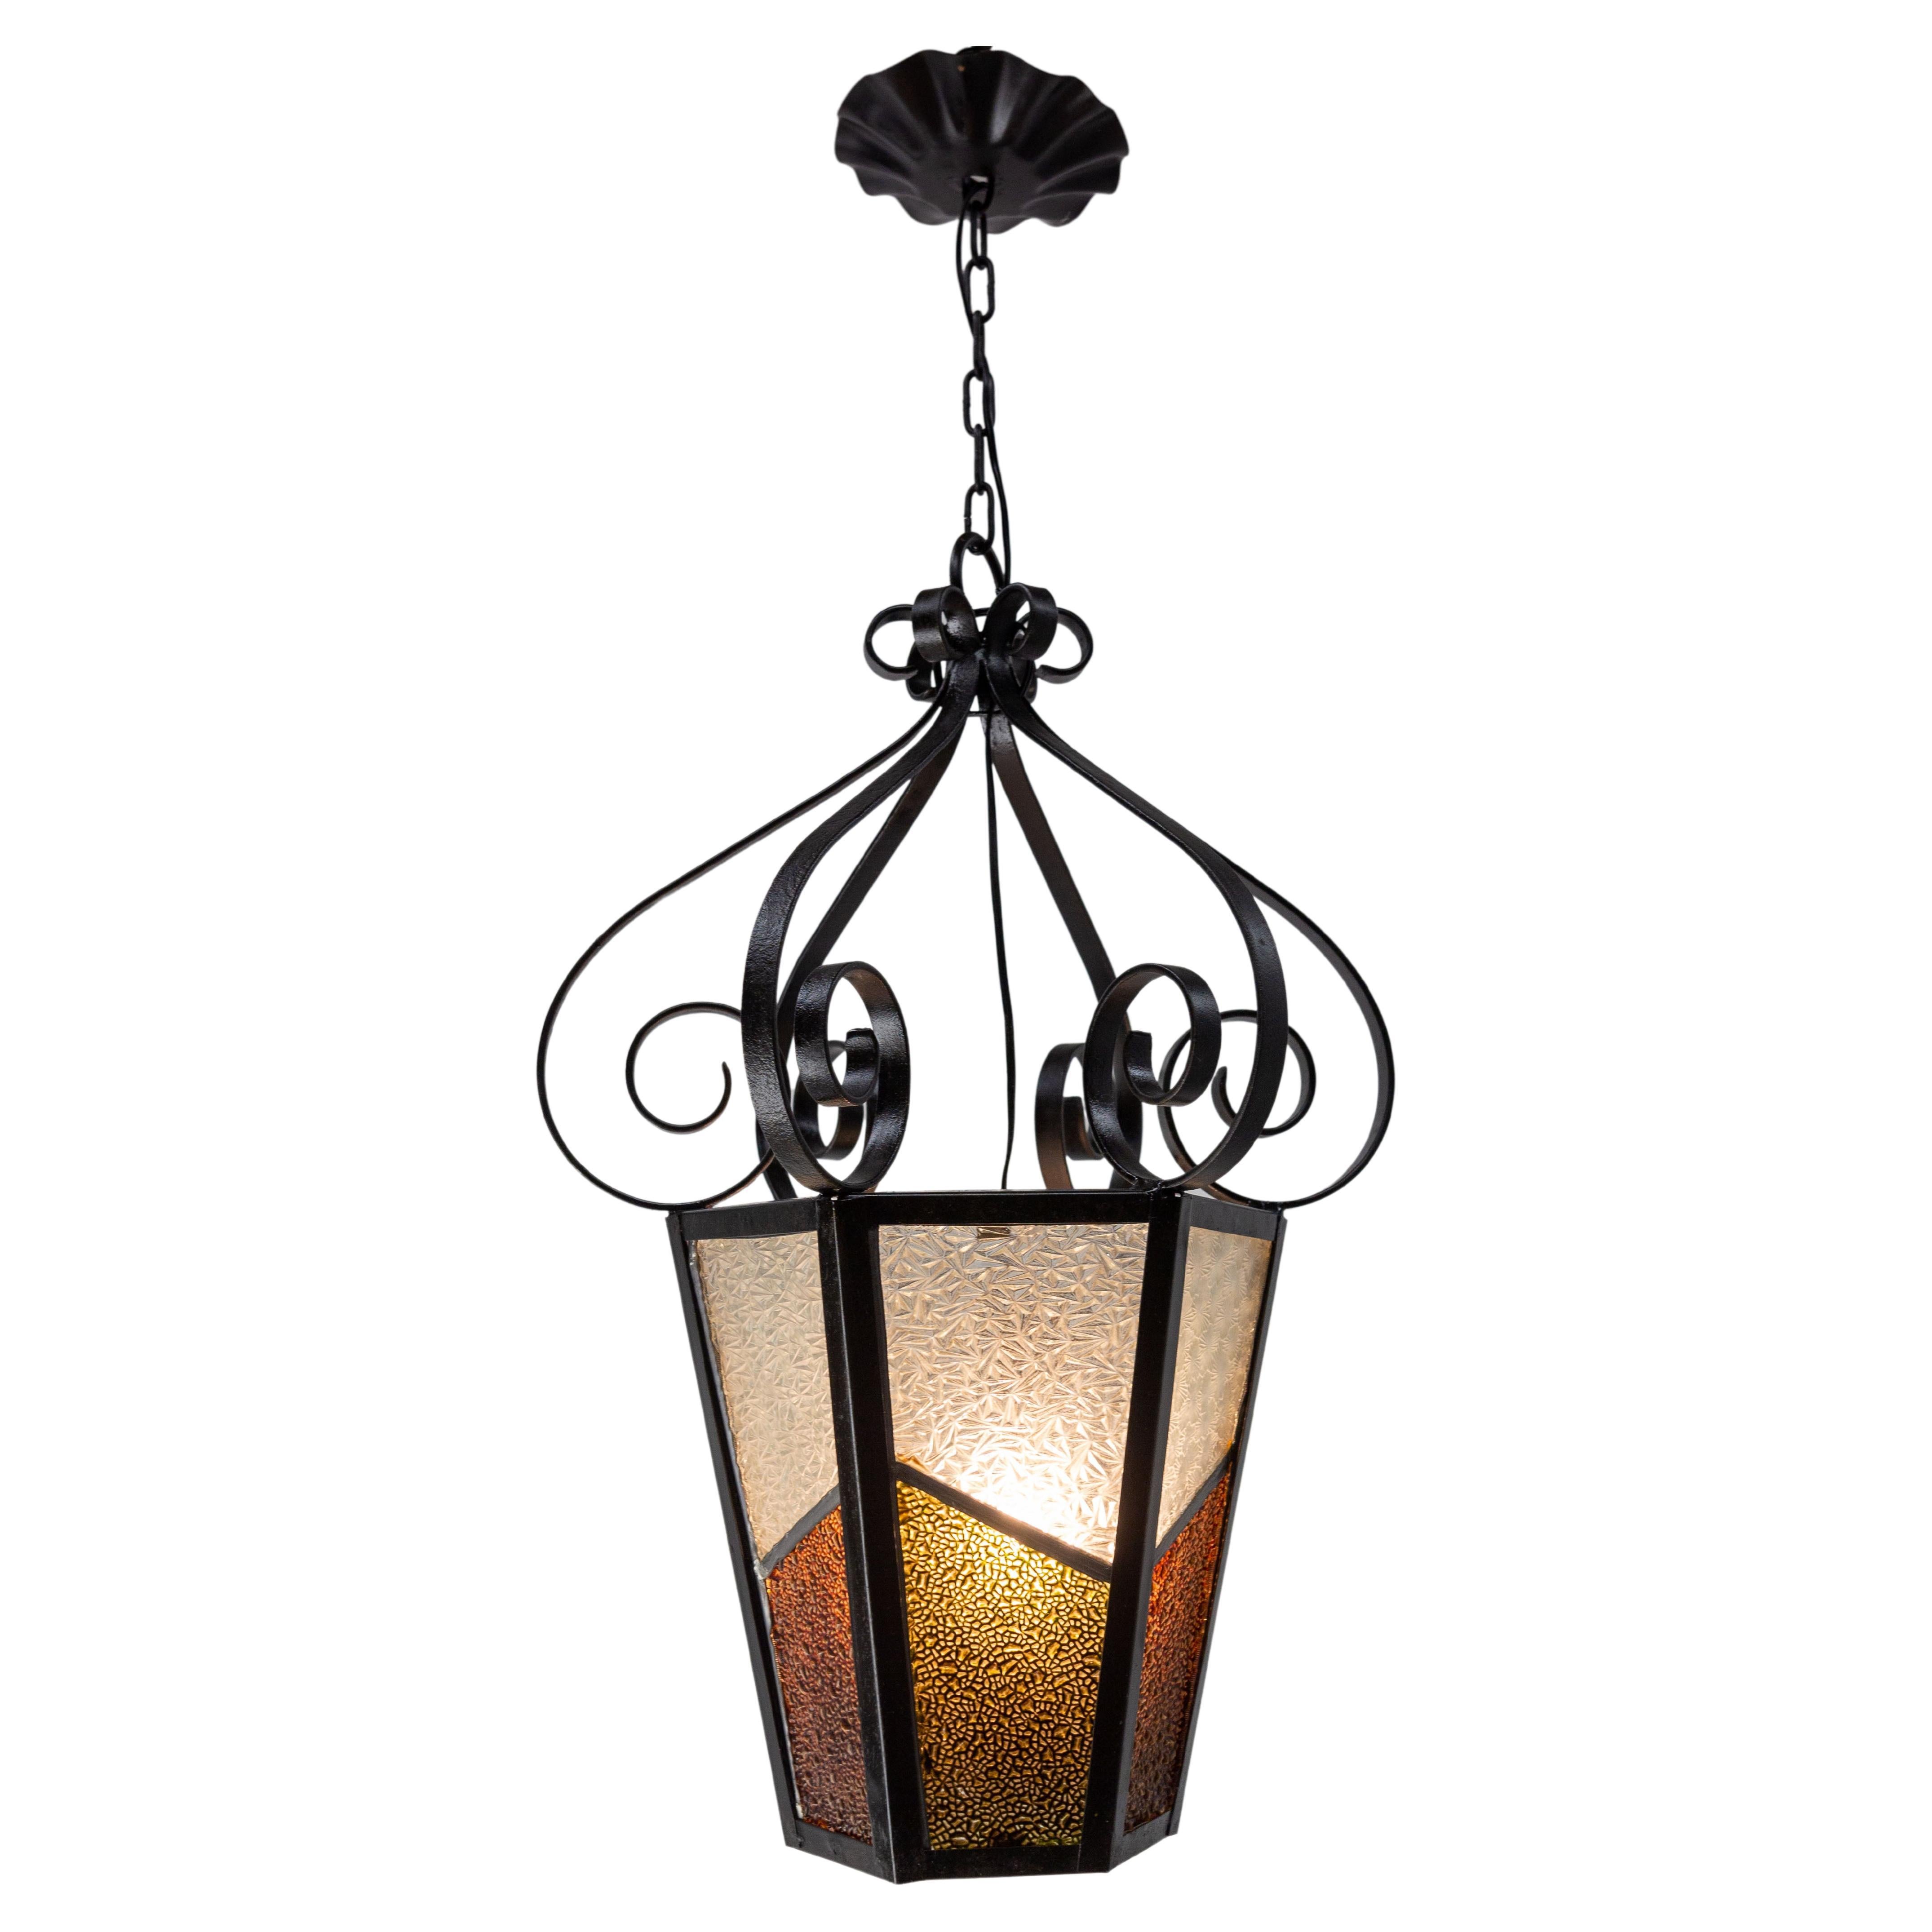 Iron Textured & Colored Glass Ceiling Lamp Lustre French Lantern, circa 1960 For Sale